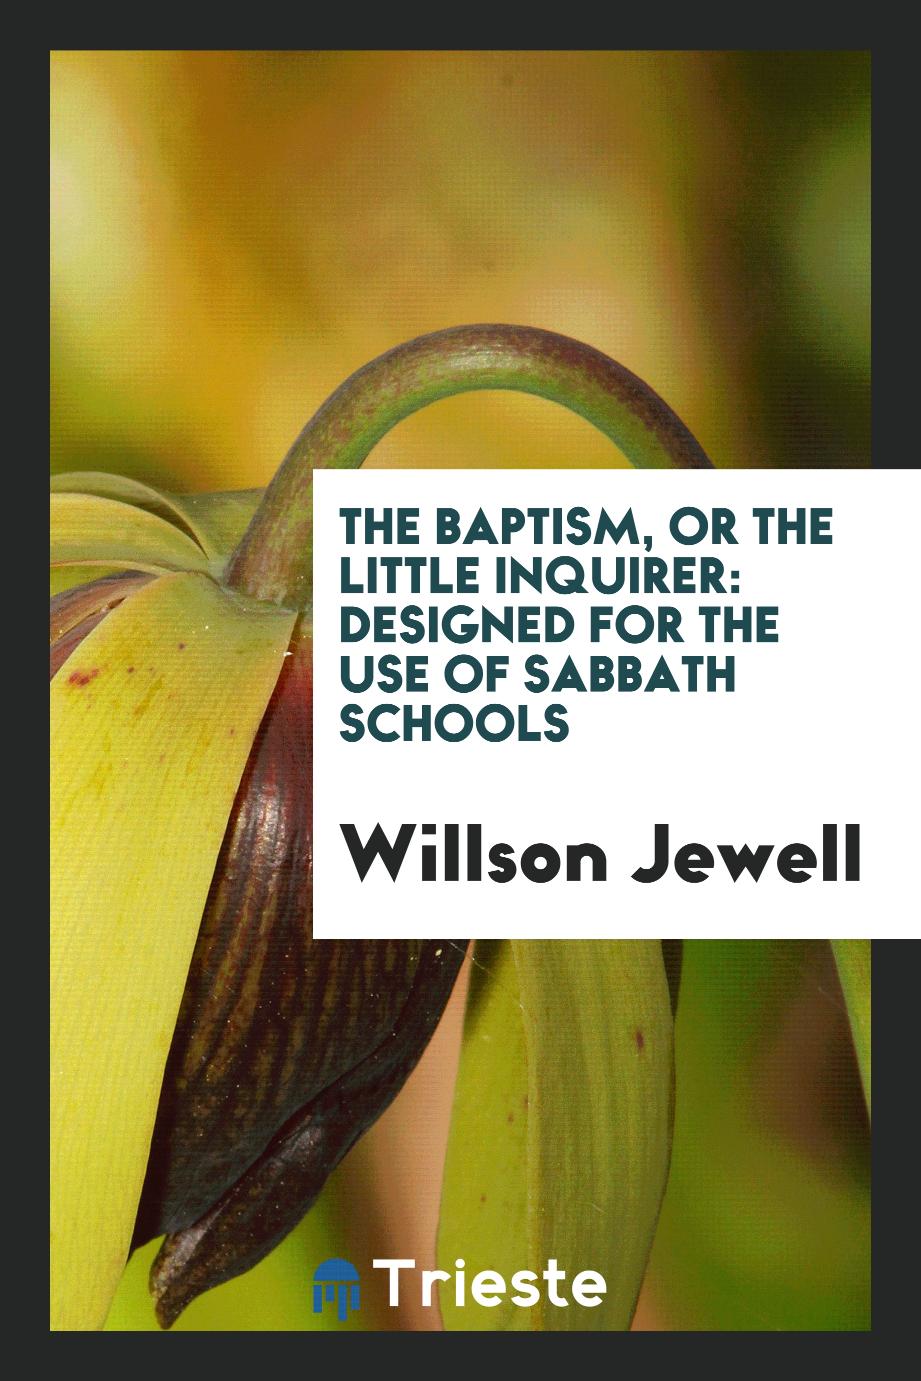 The Baptism, or the Little Inquirer: Designed for the Use of Sabbath Schools